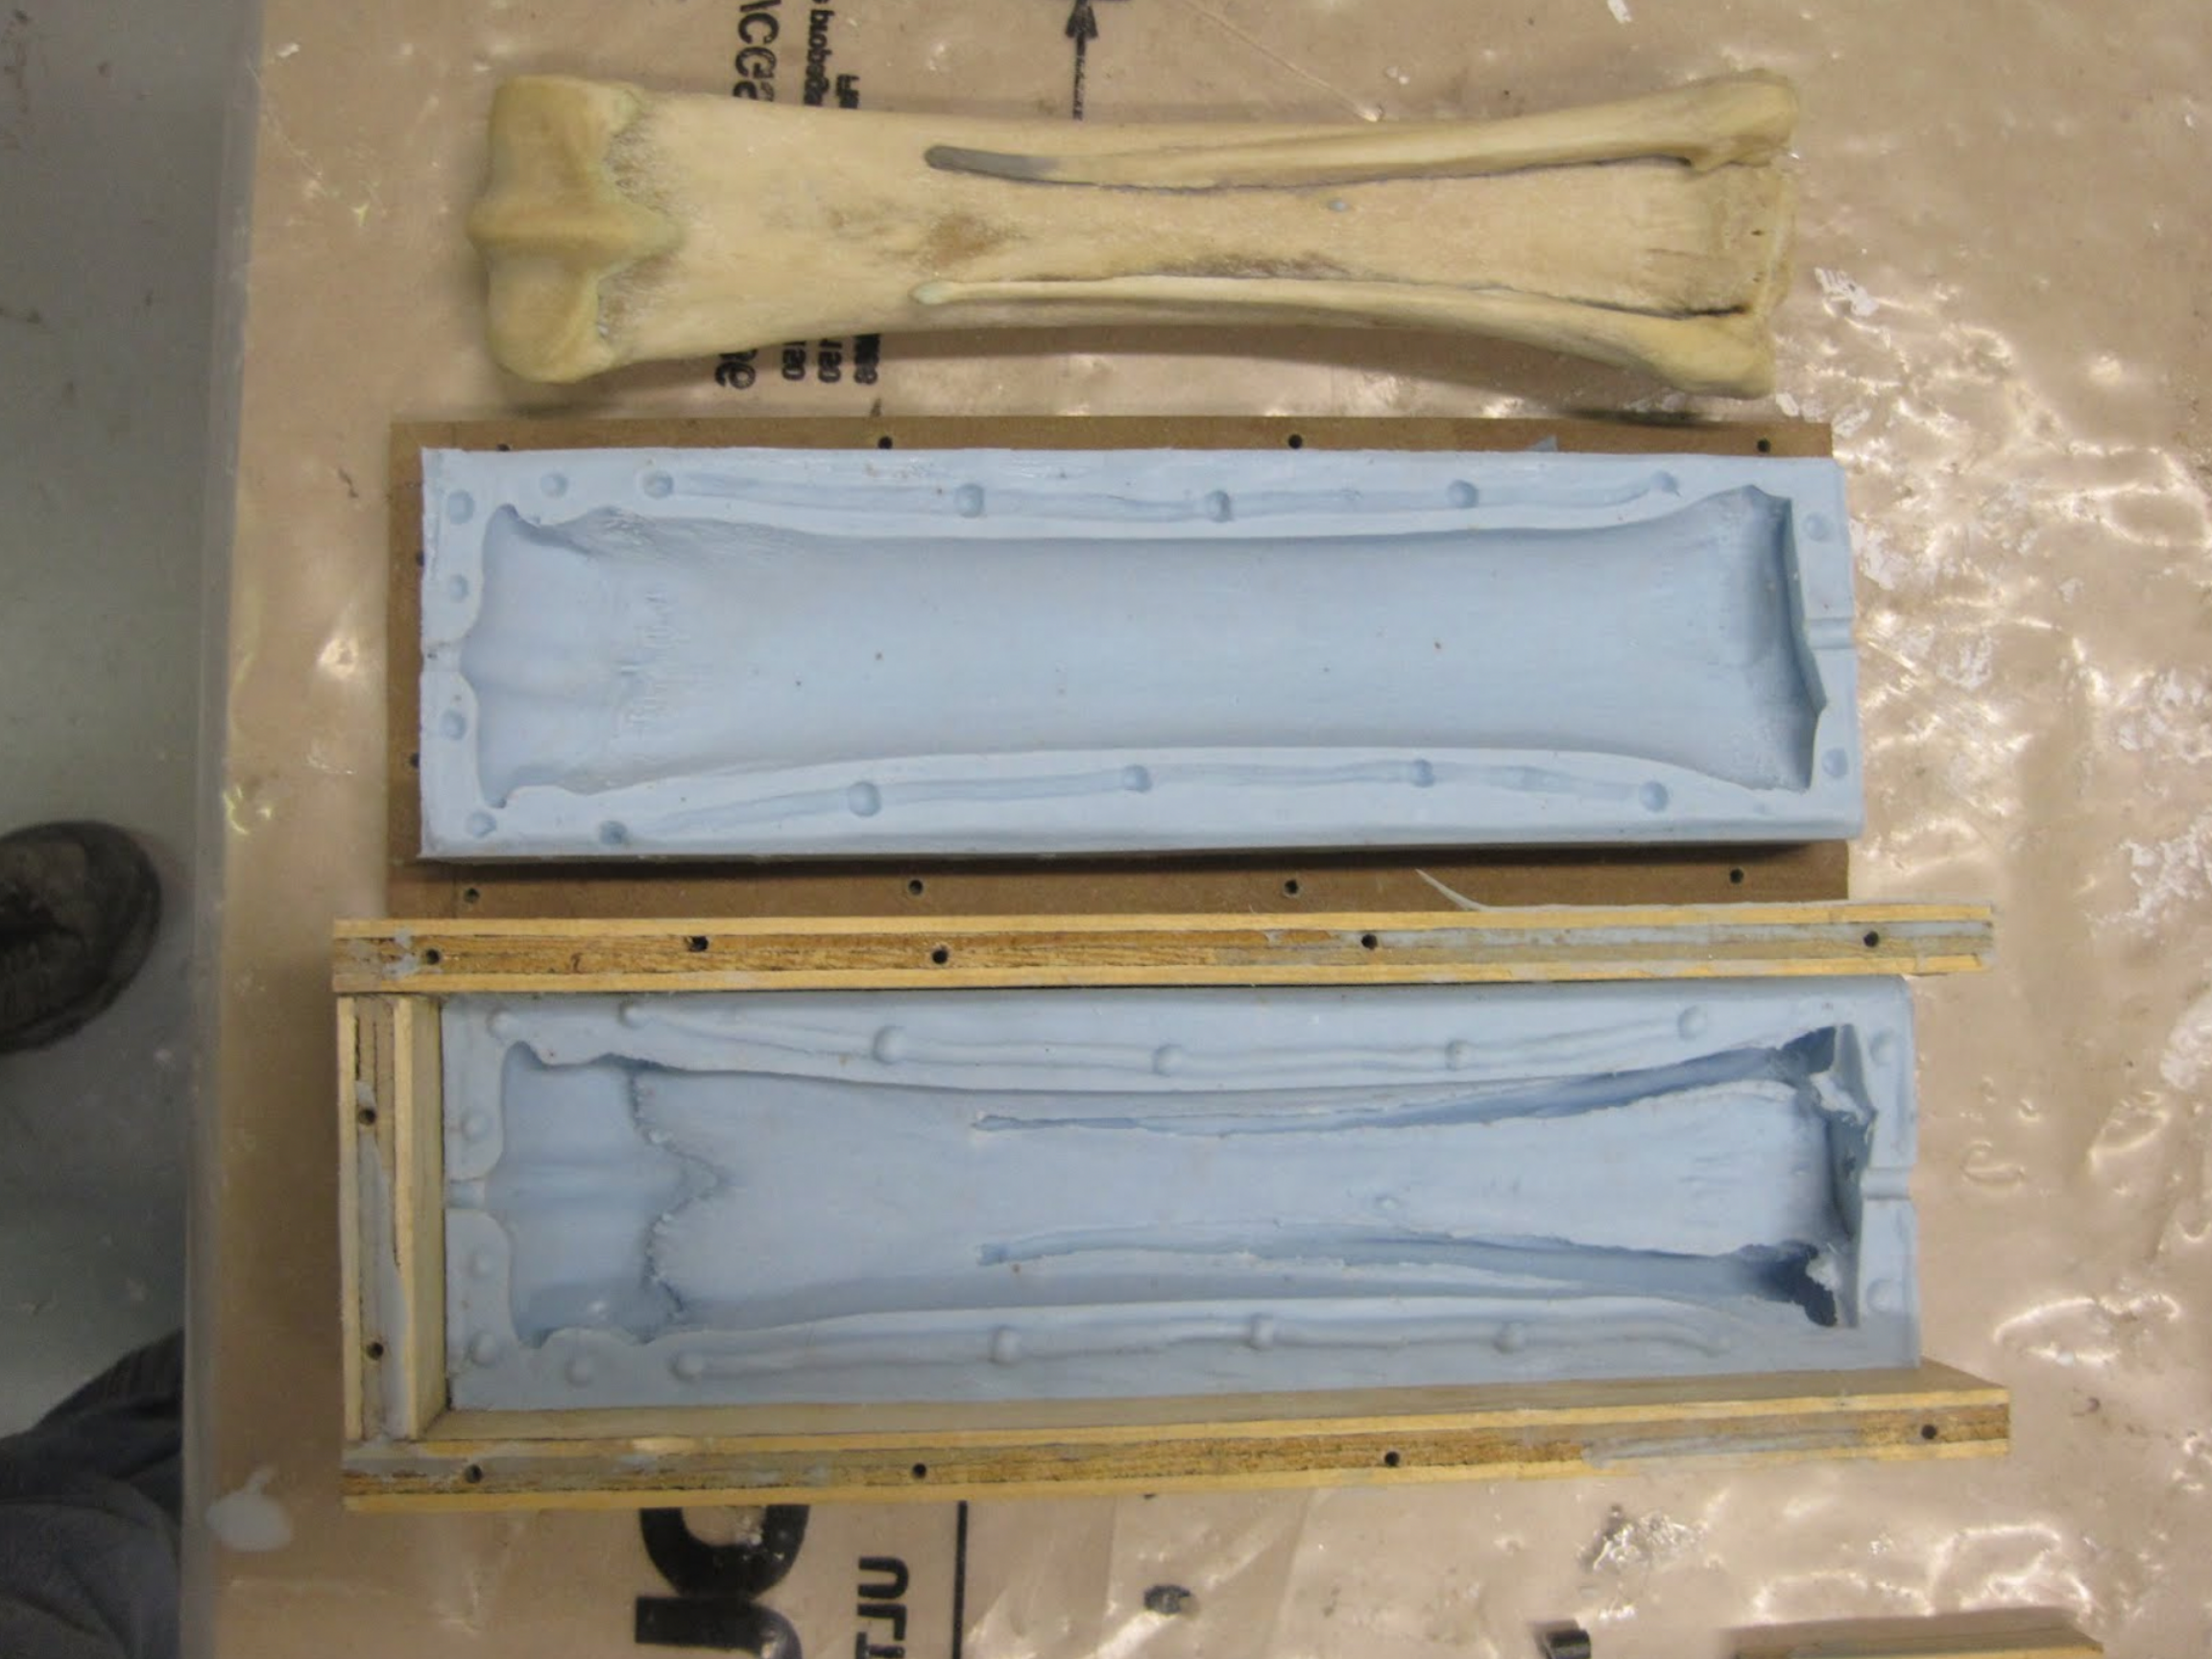 Here we can see the completed two halves of the mold and the original bone.